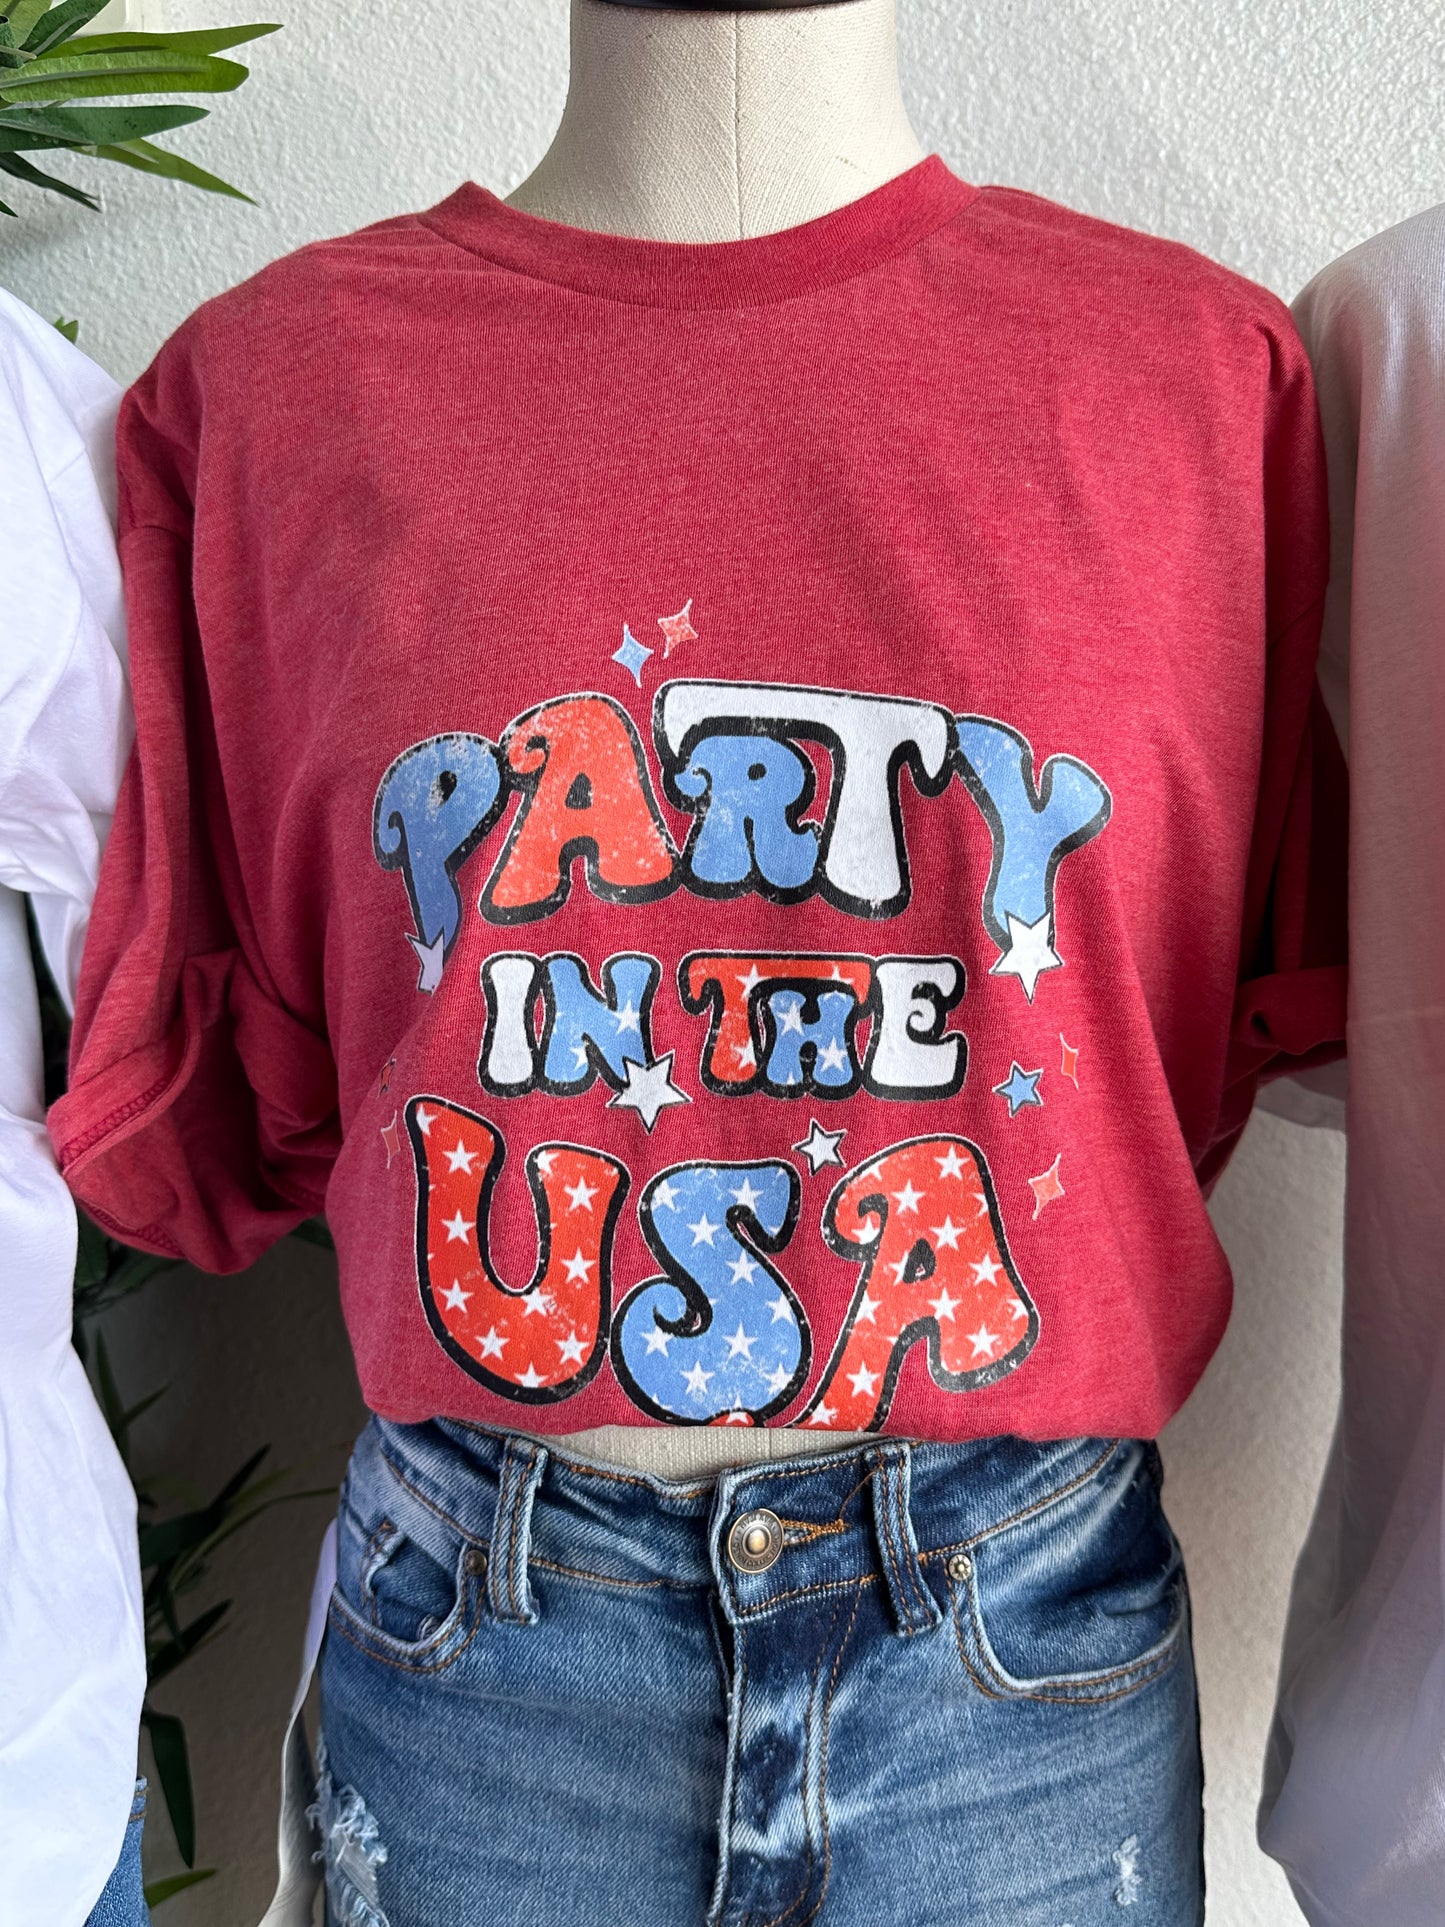 Vintage "Party in the USA"